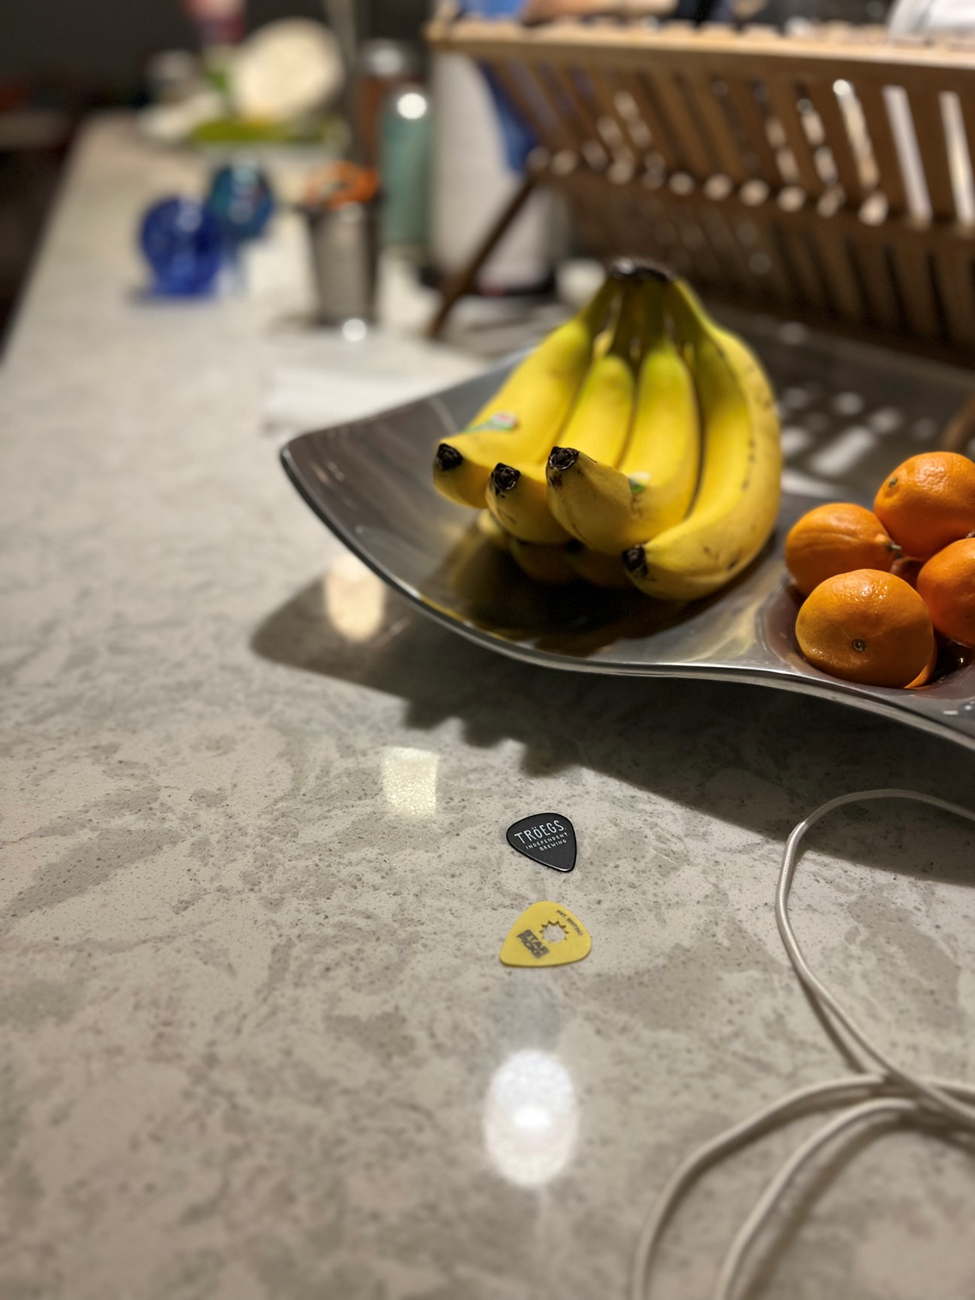 a "still life" comprised of some bananas, a couple guitar picks, and an out-of-focus dishrack, among other kitchen effluvia